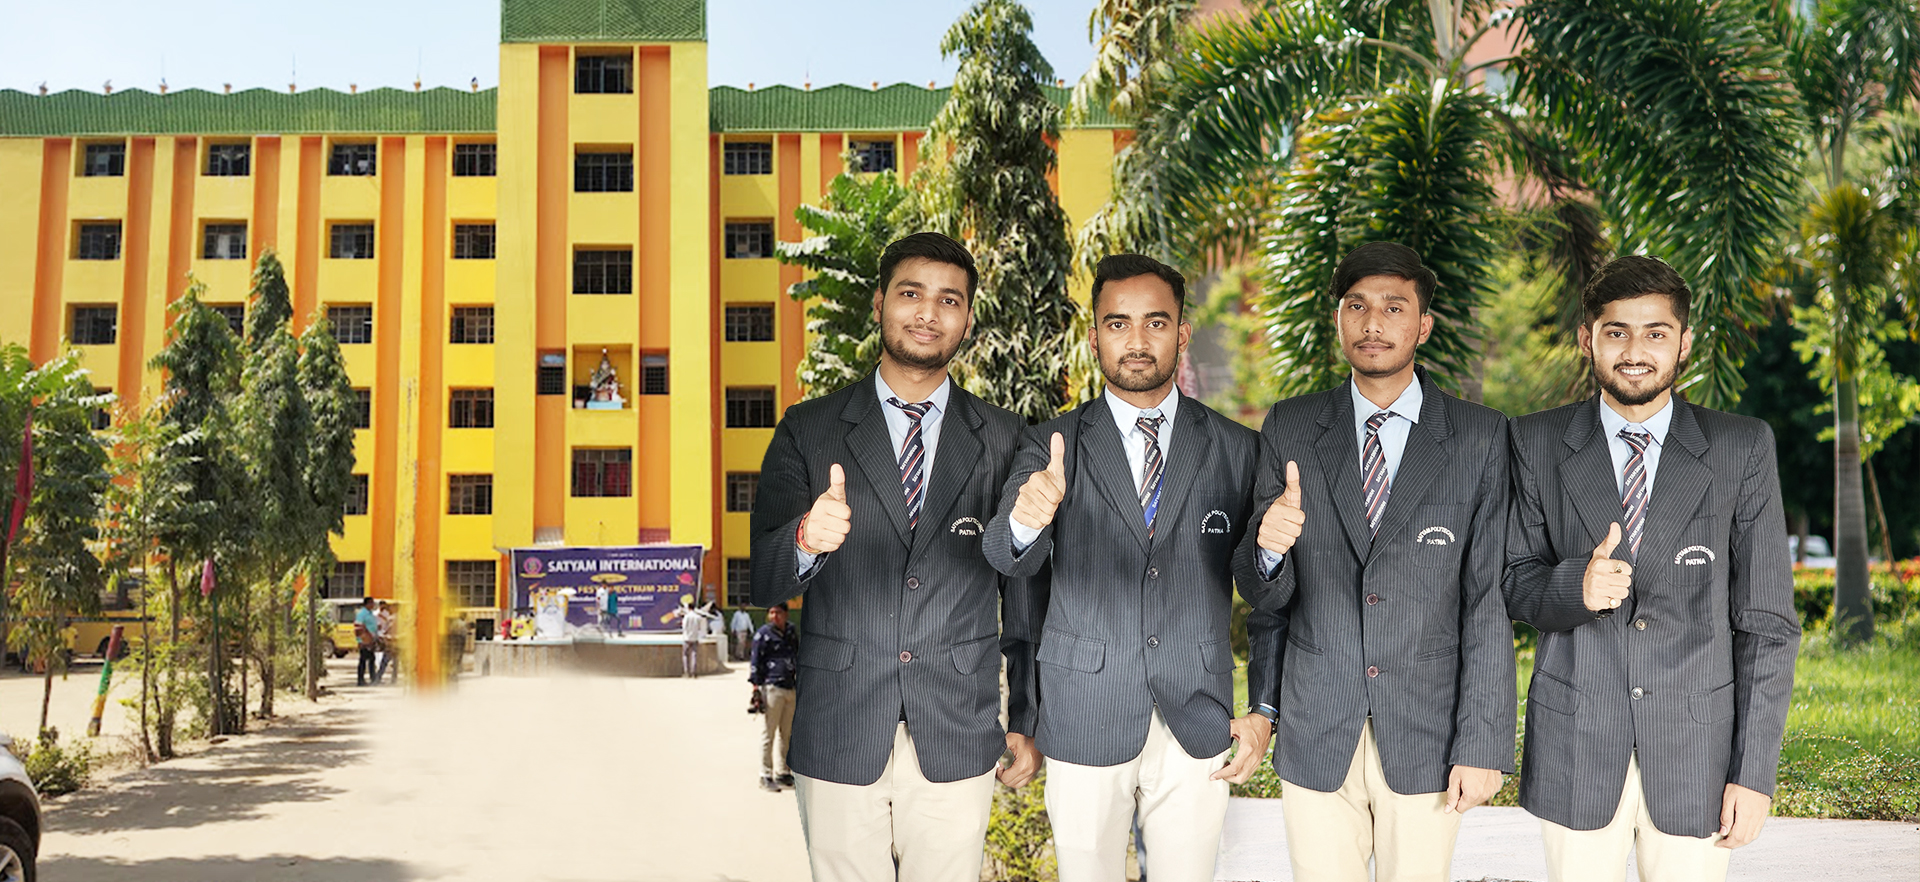 Polytechnic college in patna, AICTE Aproved polytechnic college in patna,  best polytechnic college in patna, excellent polytechnic college in bihar,  admission in polytechnic in bihar, polytechnic college in patna,  polytechnic college in